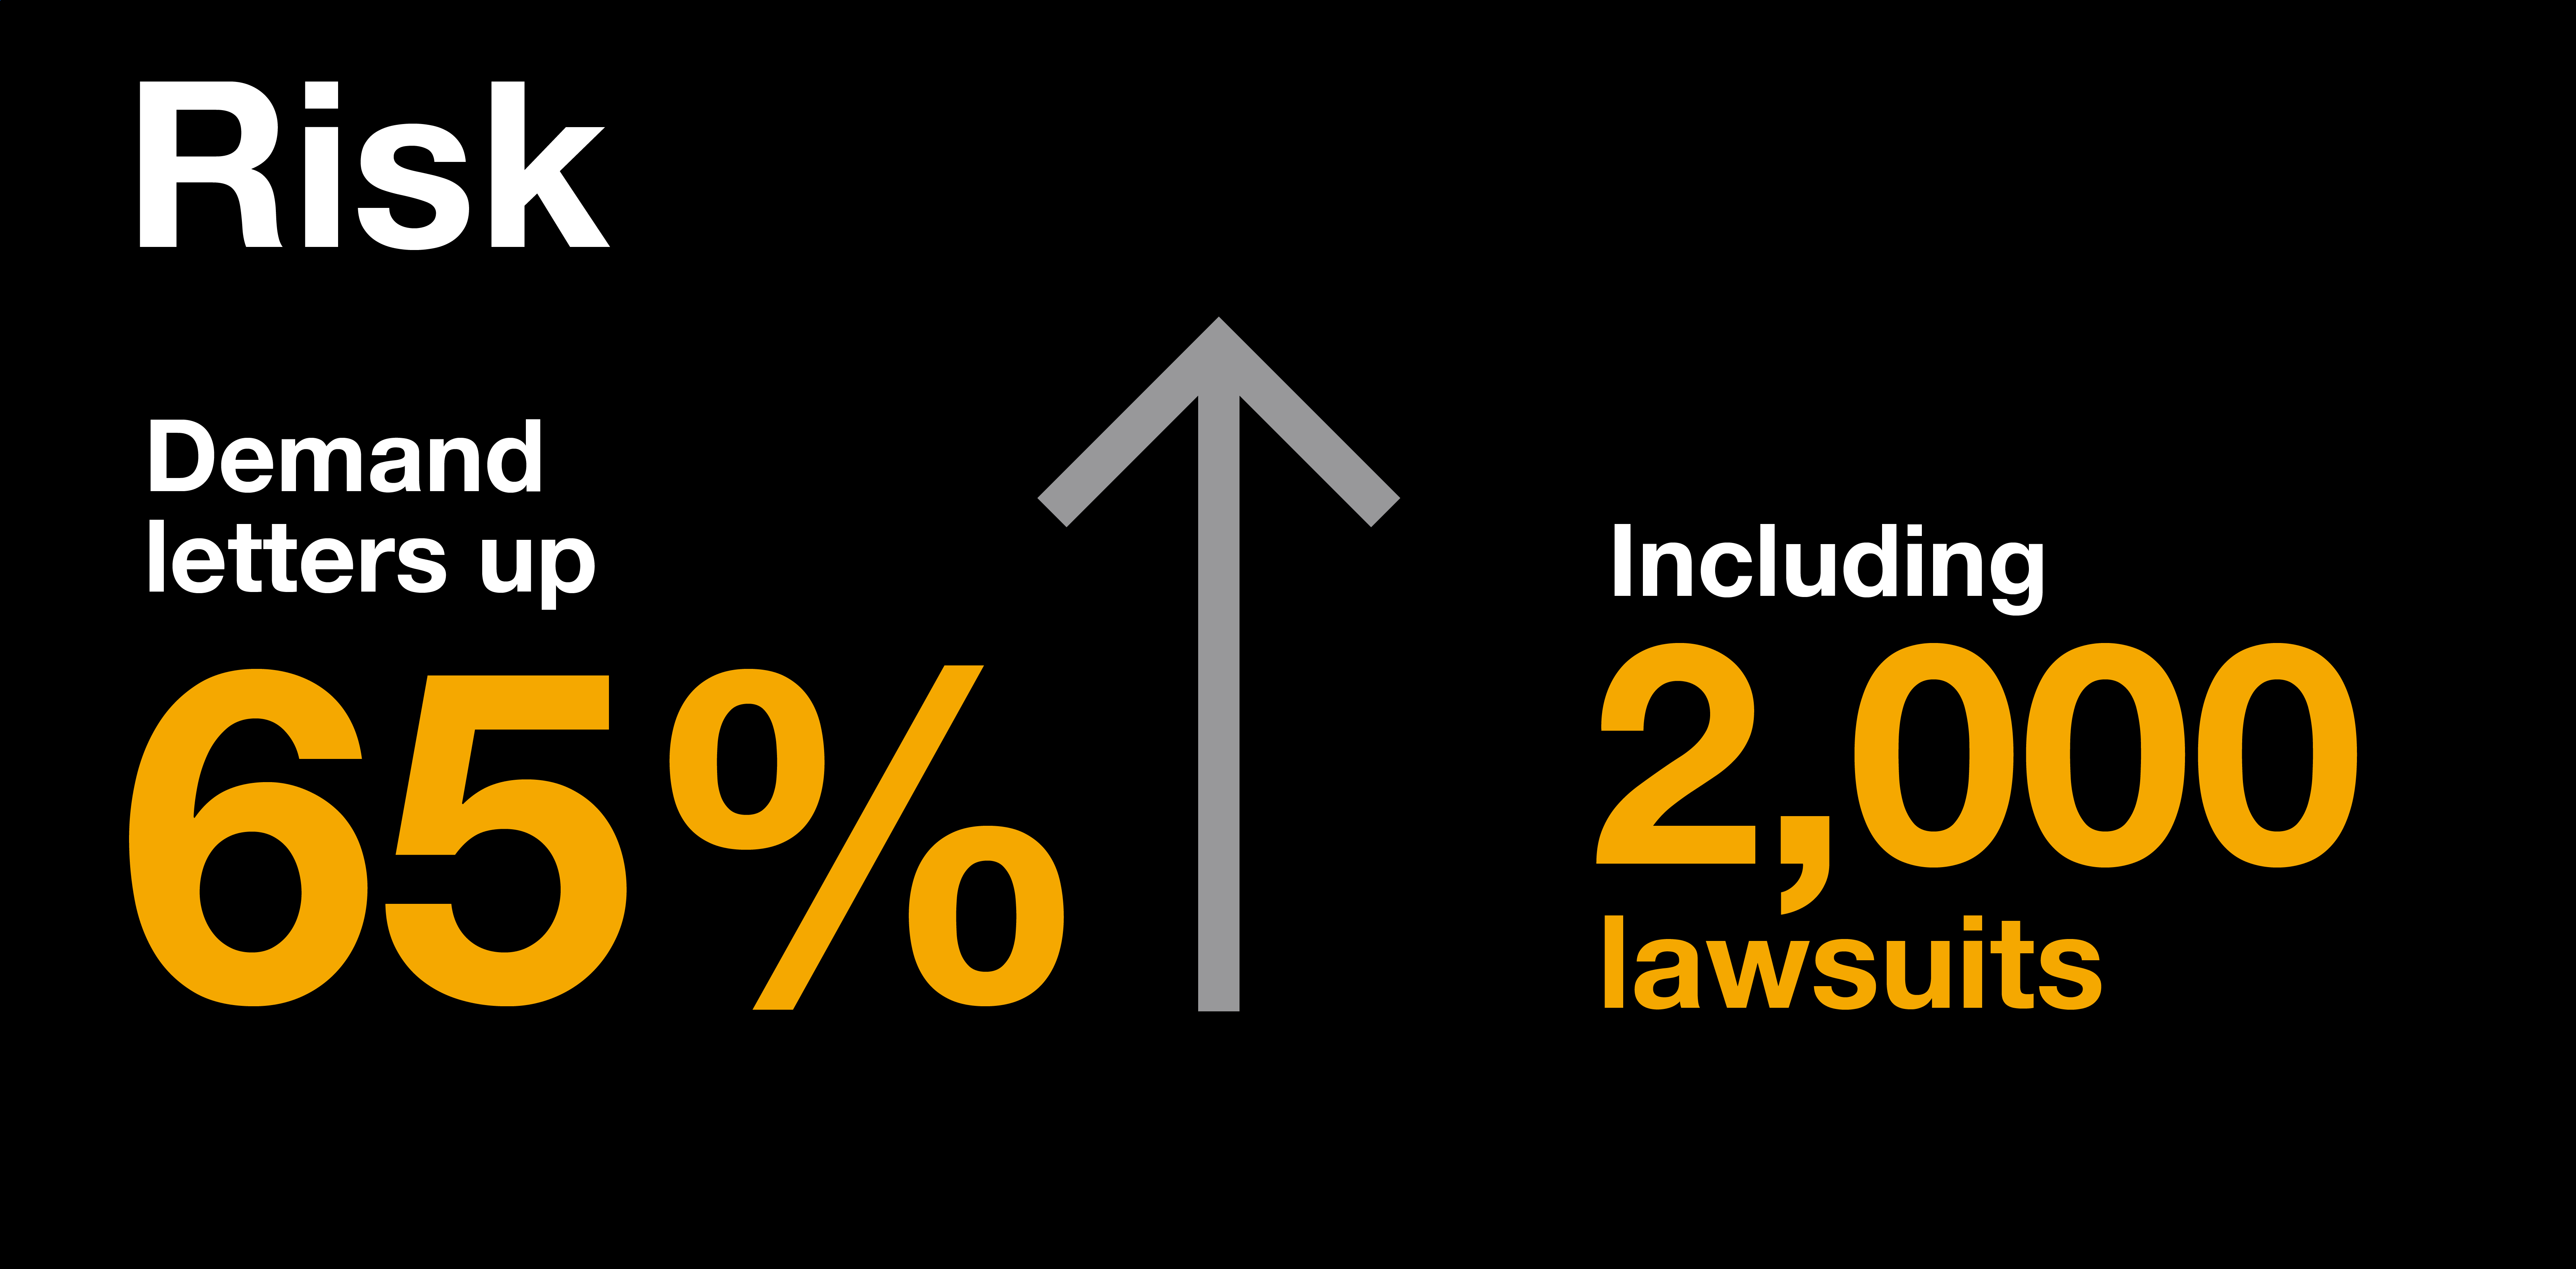 Risk infographic displaying ADA demand letters rose by 65% since 2019. In 2020, there were more than 2,000 lawsuits.]